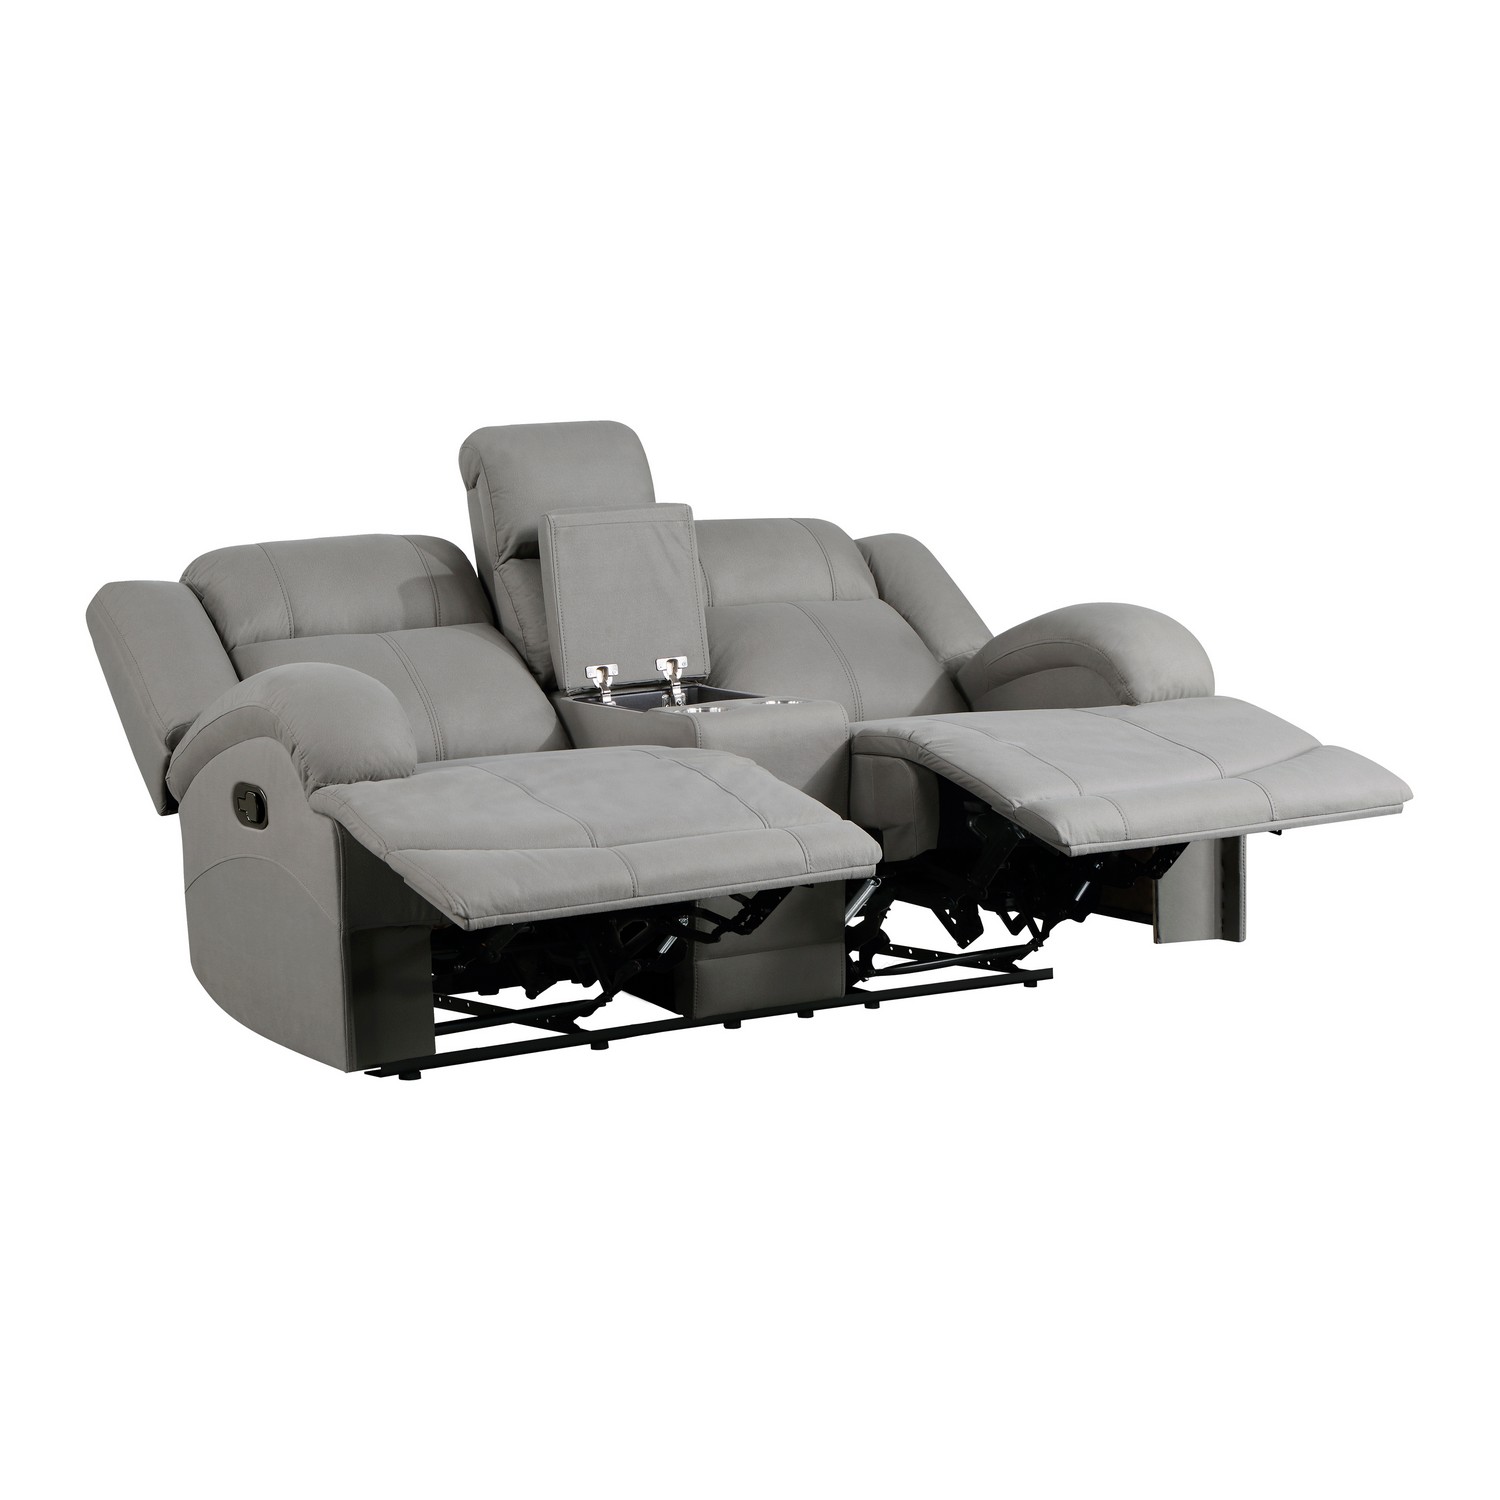 Homelegance Camryn Double Reclining Love Seat - Gray